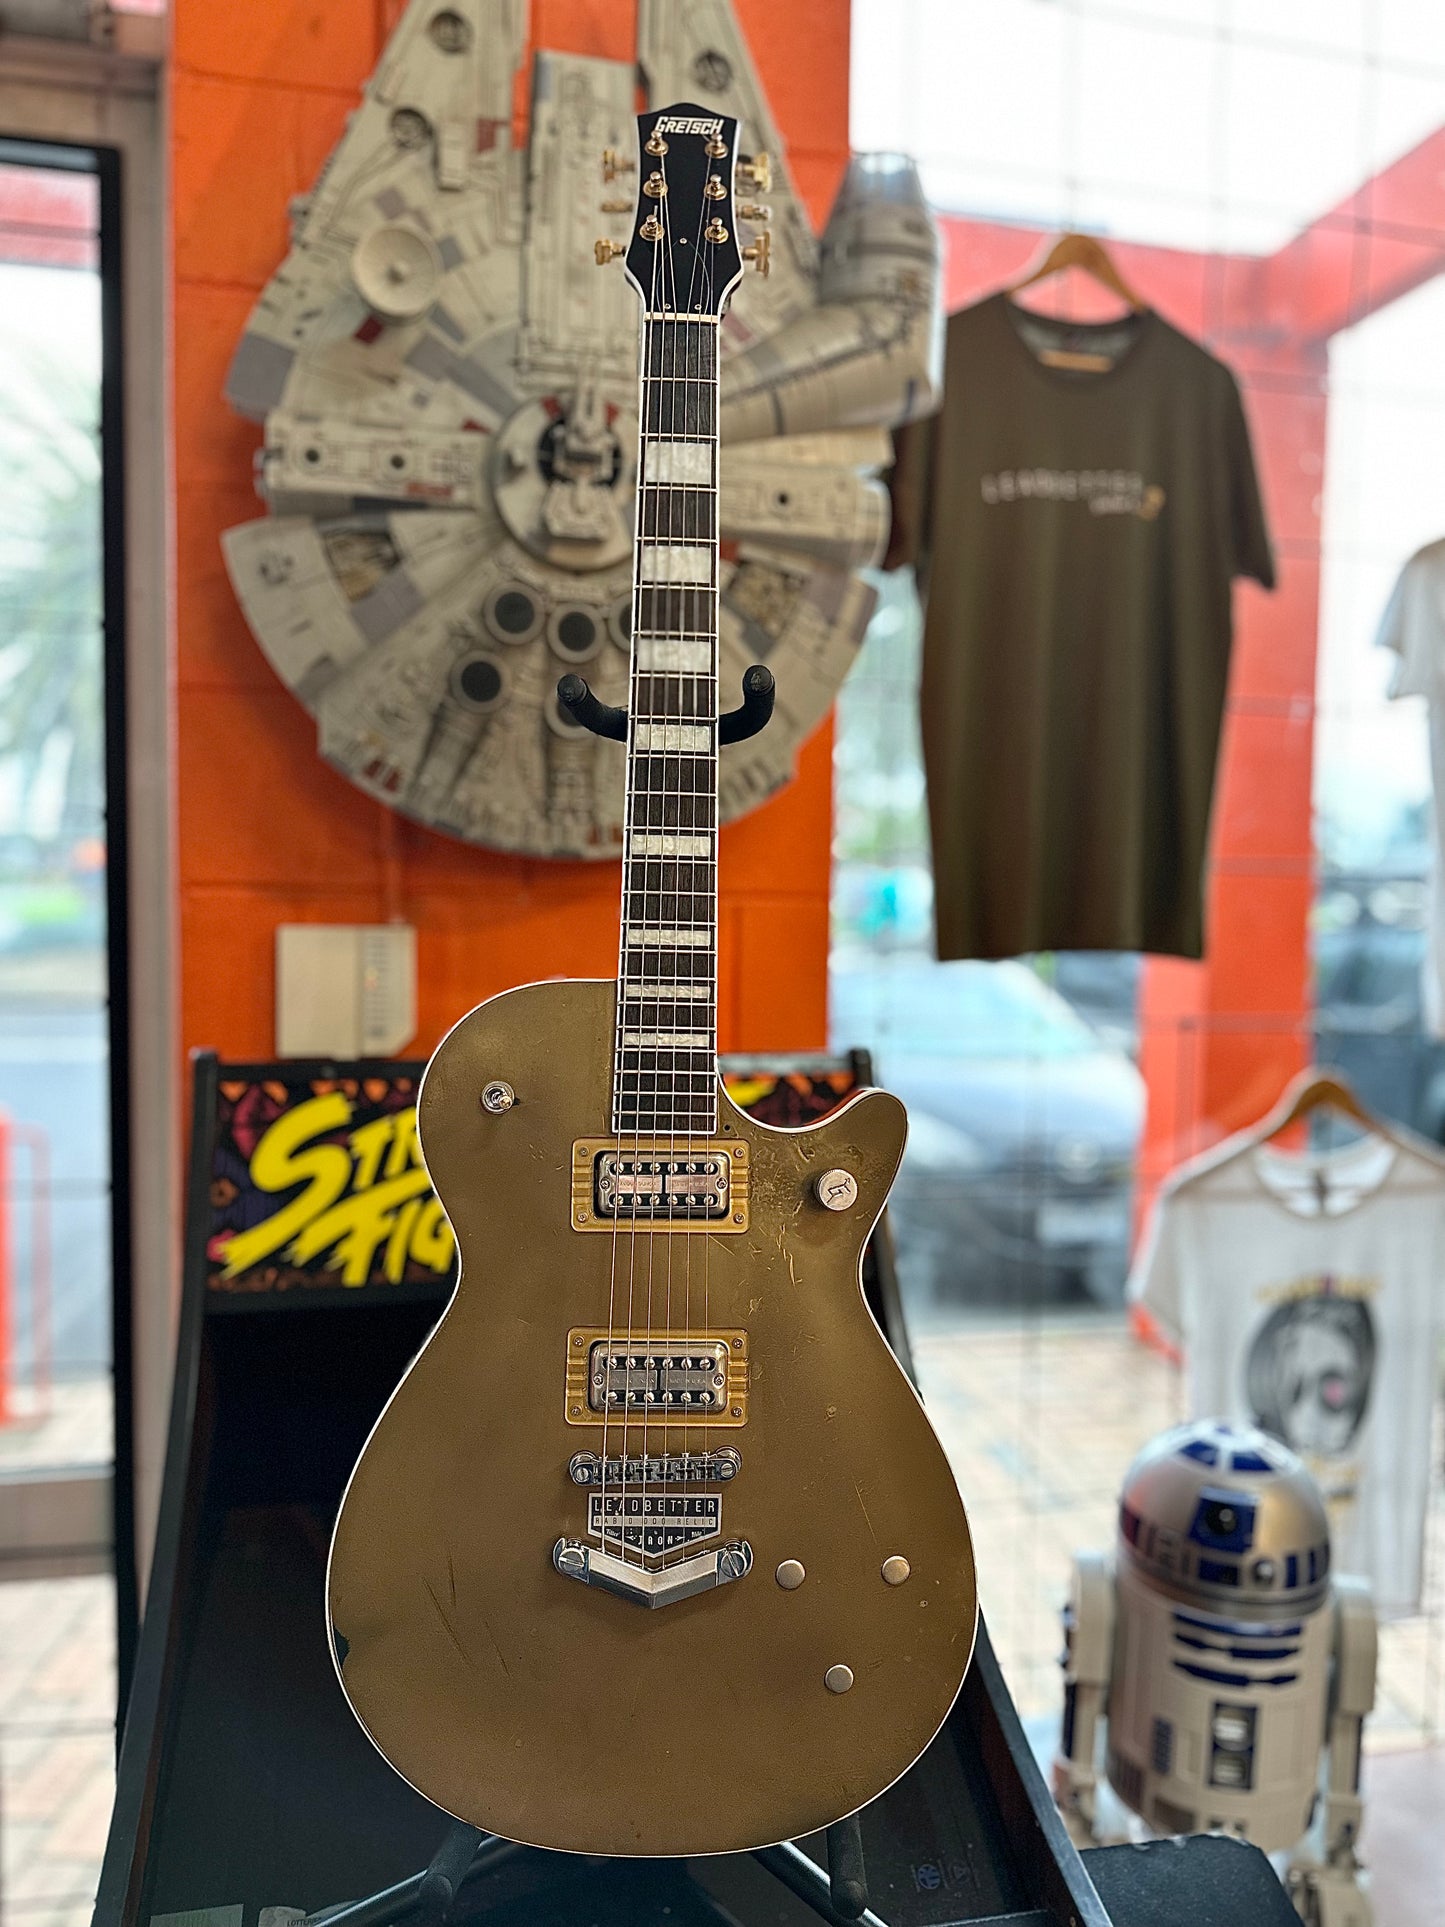 Gretsch | Leadbetter Rabid Dog Relic | Electromatic G5230T | Seymour Duncan Psyclones | Relic Old Gold